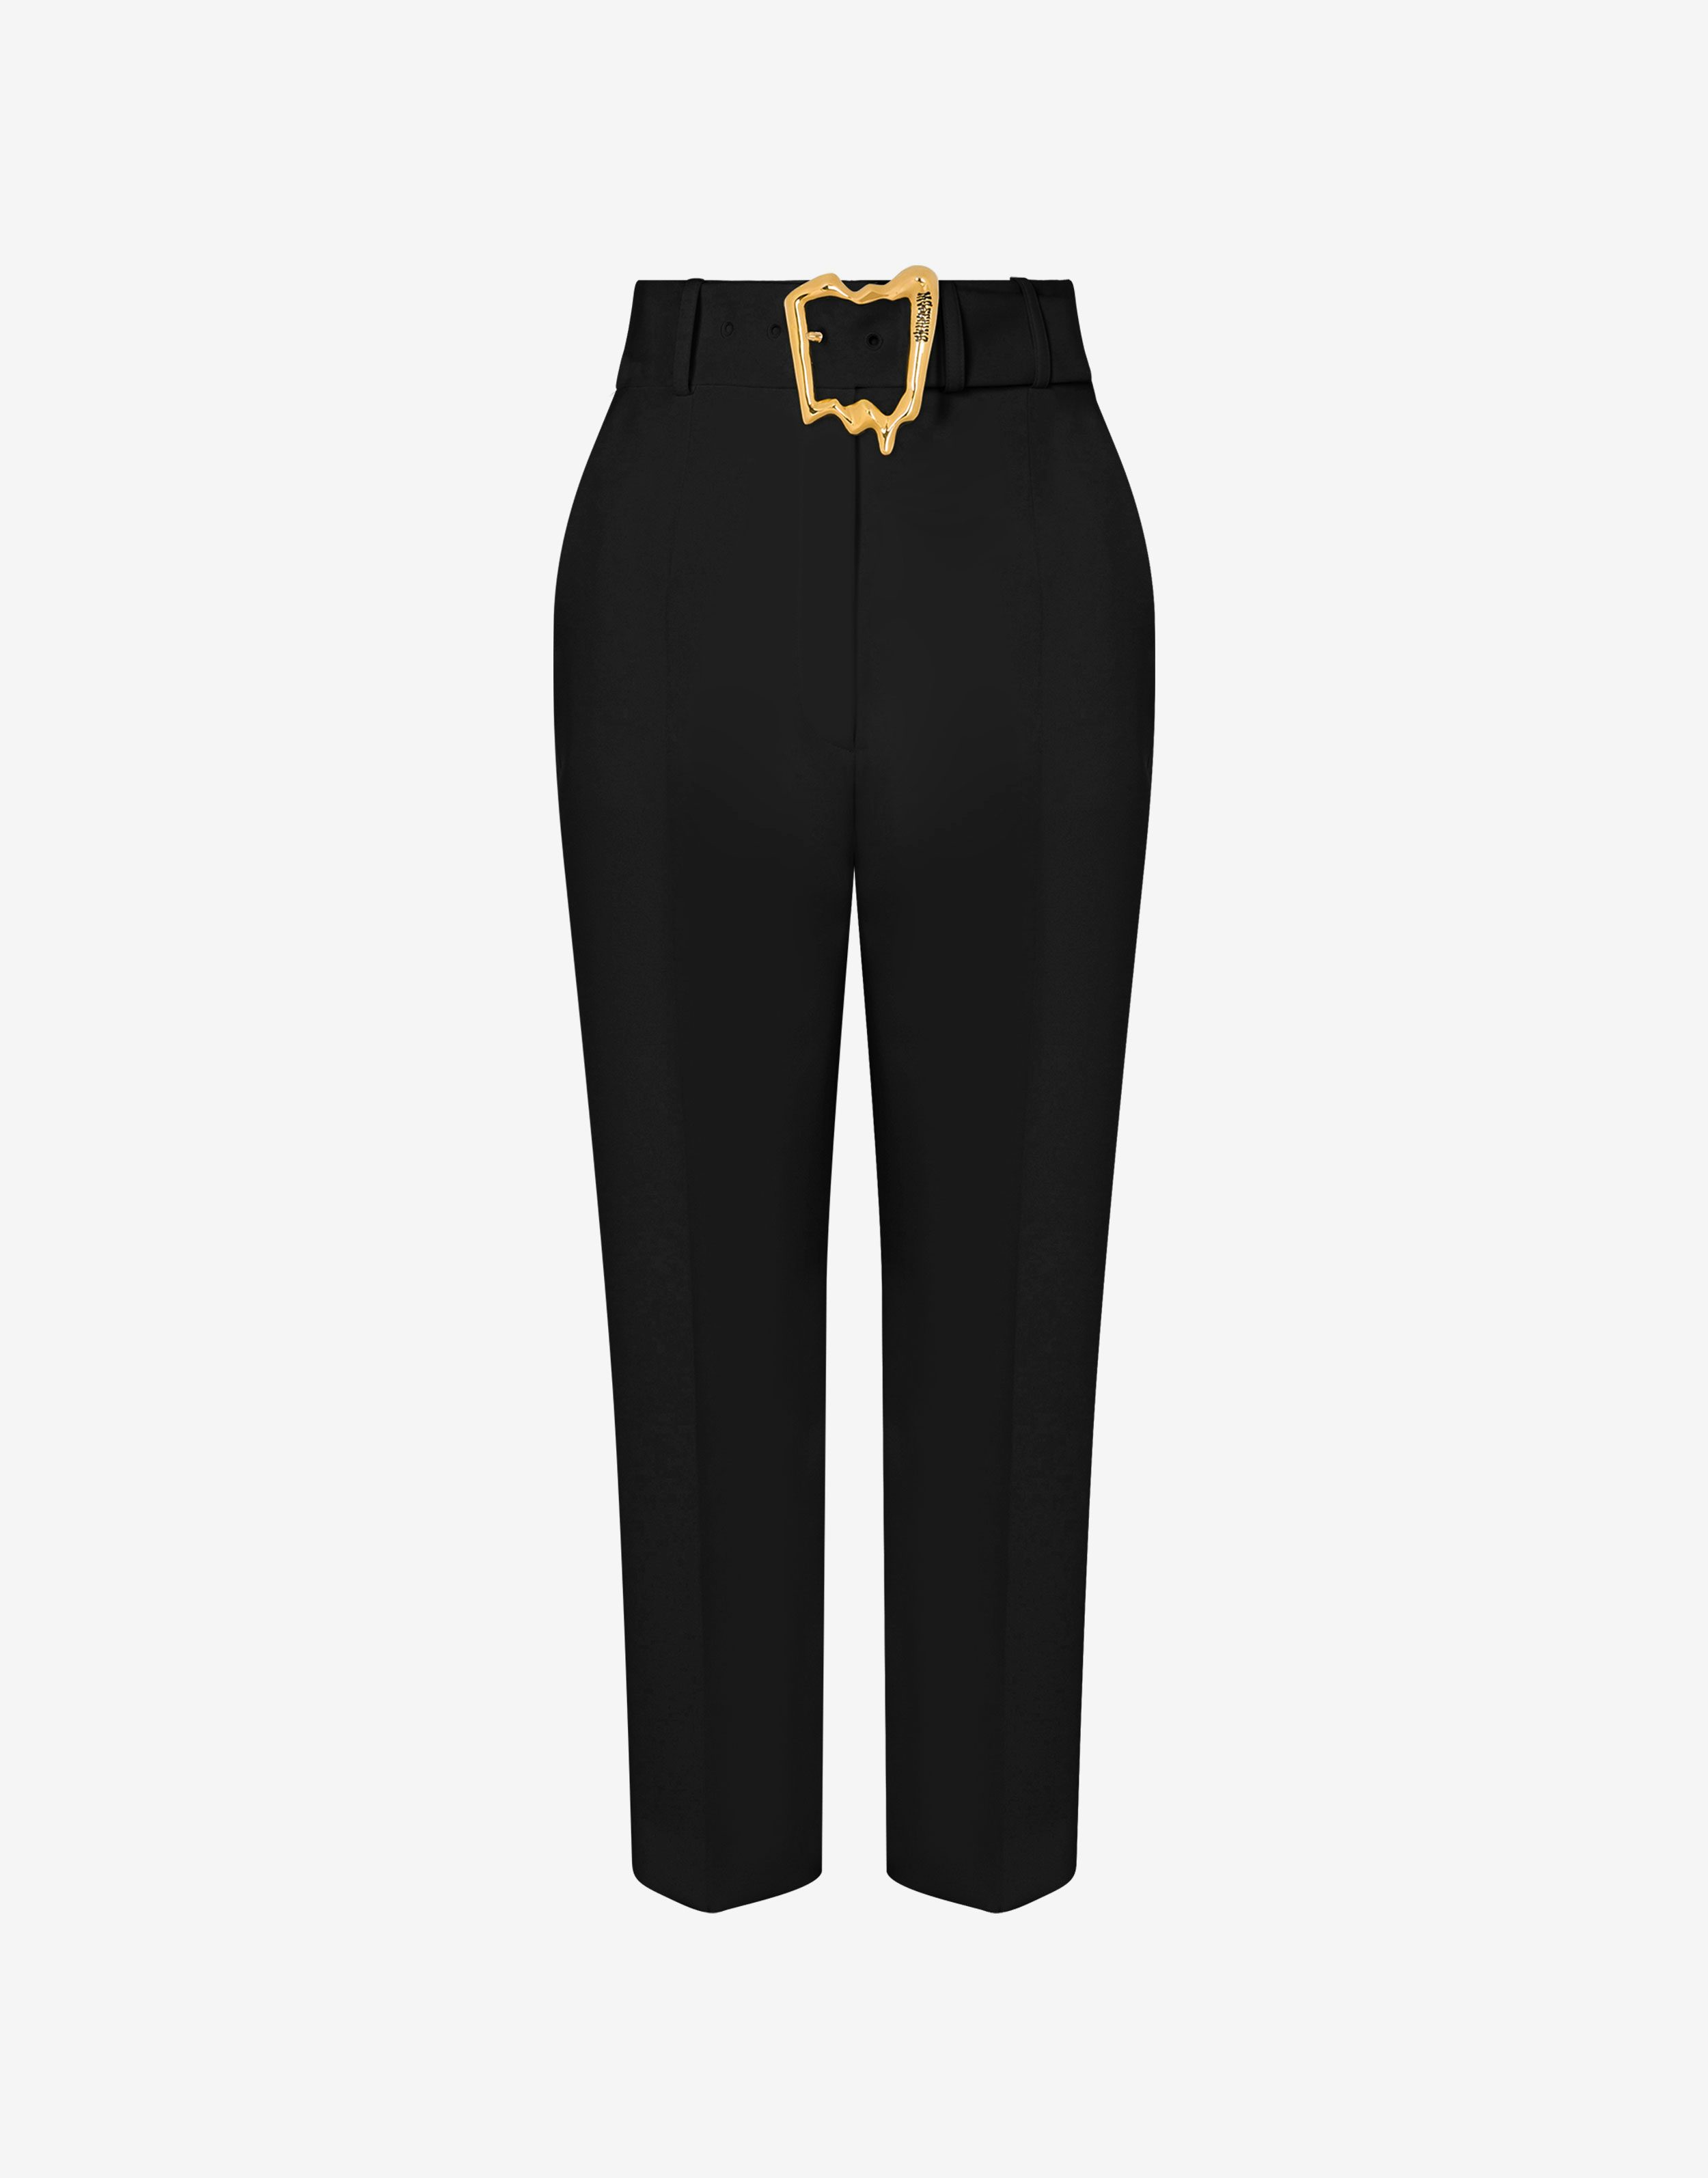 Morphed Buckle stretch crêpe trousers